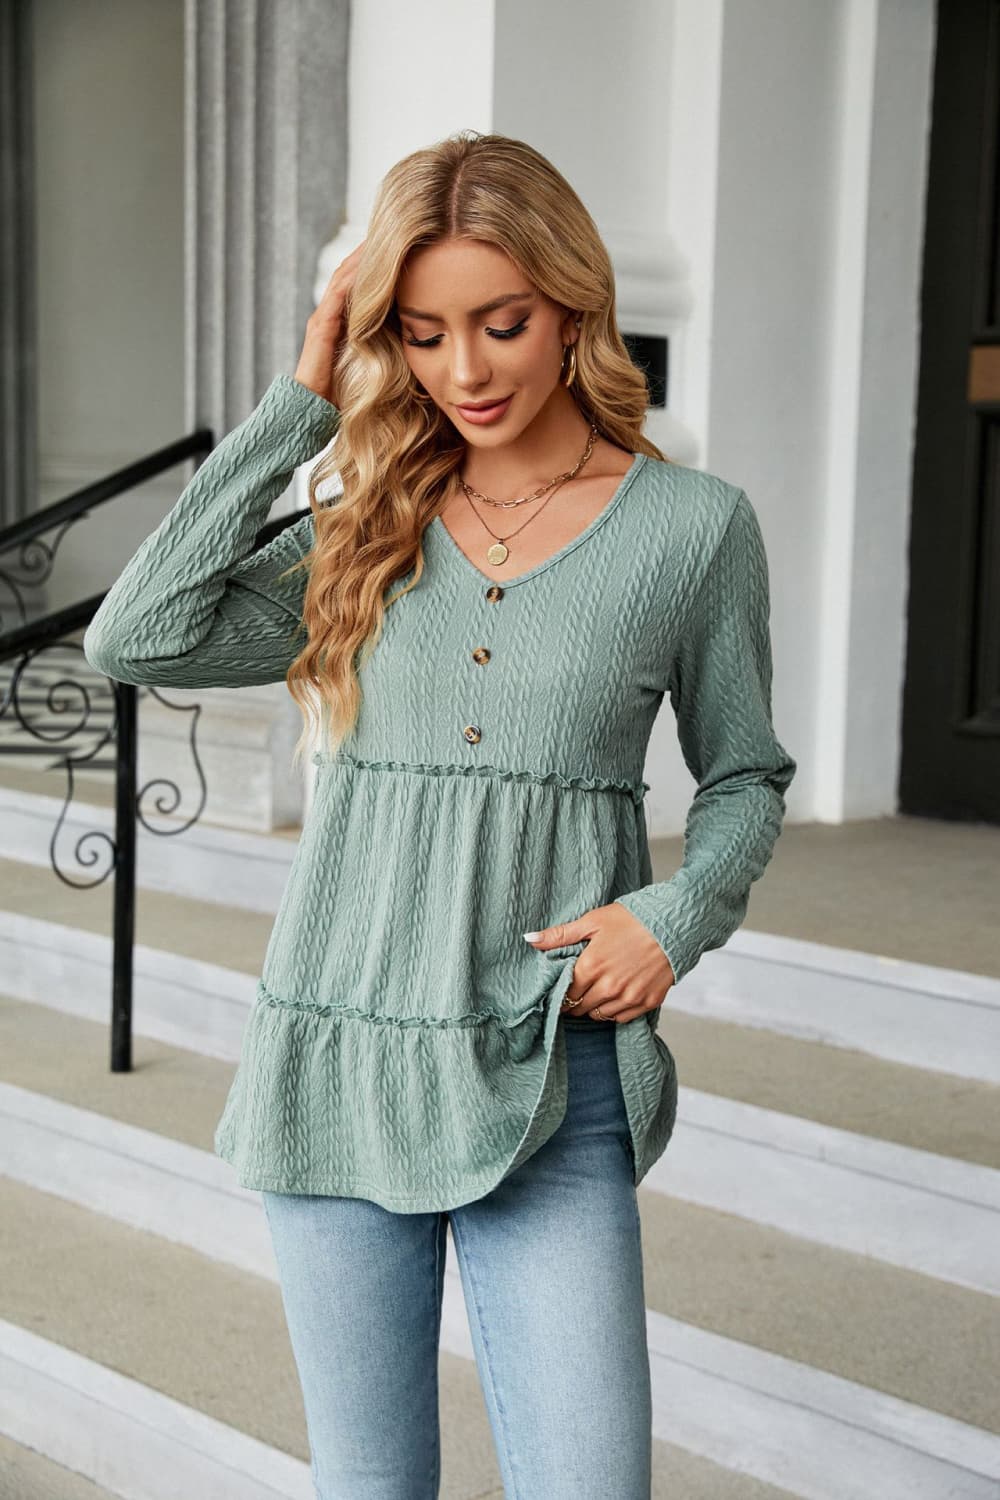 Long Sleeve V-Neck Cable-Knit Blouse - Women’s Clothing & Accessories - Shirts & Tops - 5 - 2024